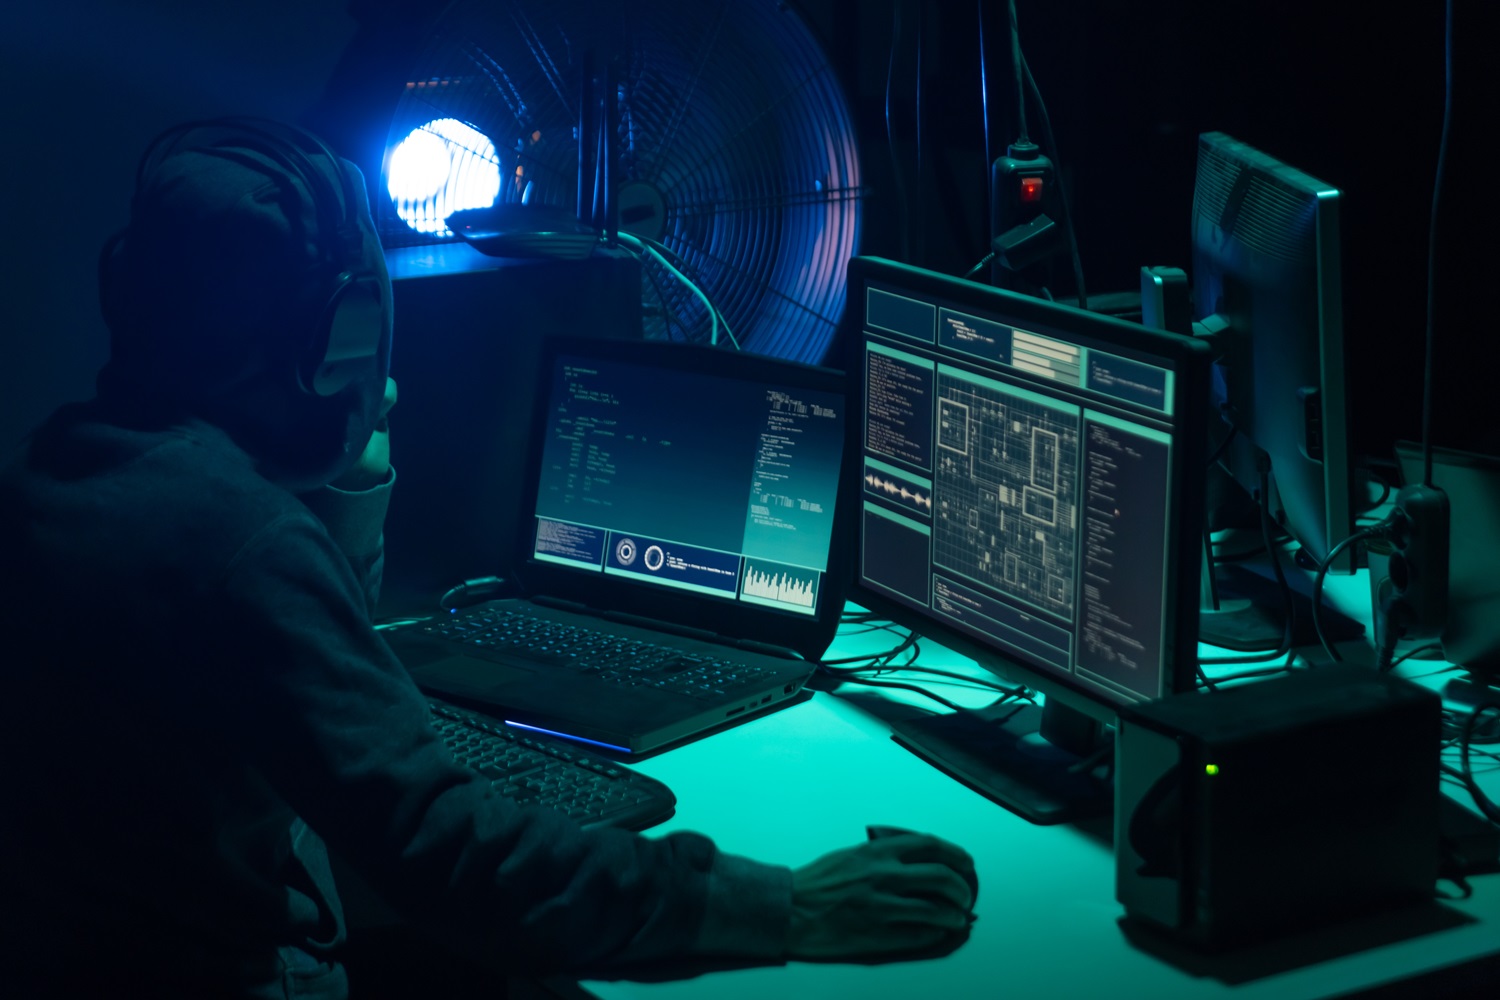 A group of people uses computers in a dark room.